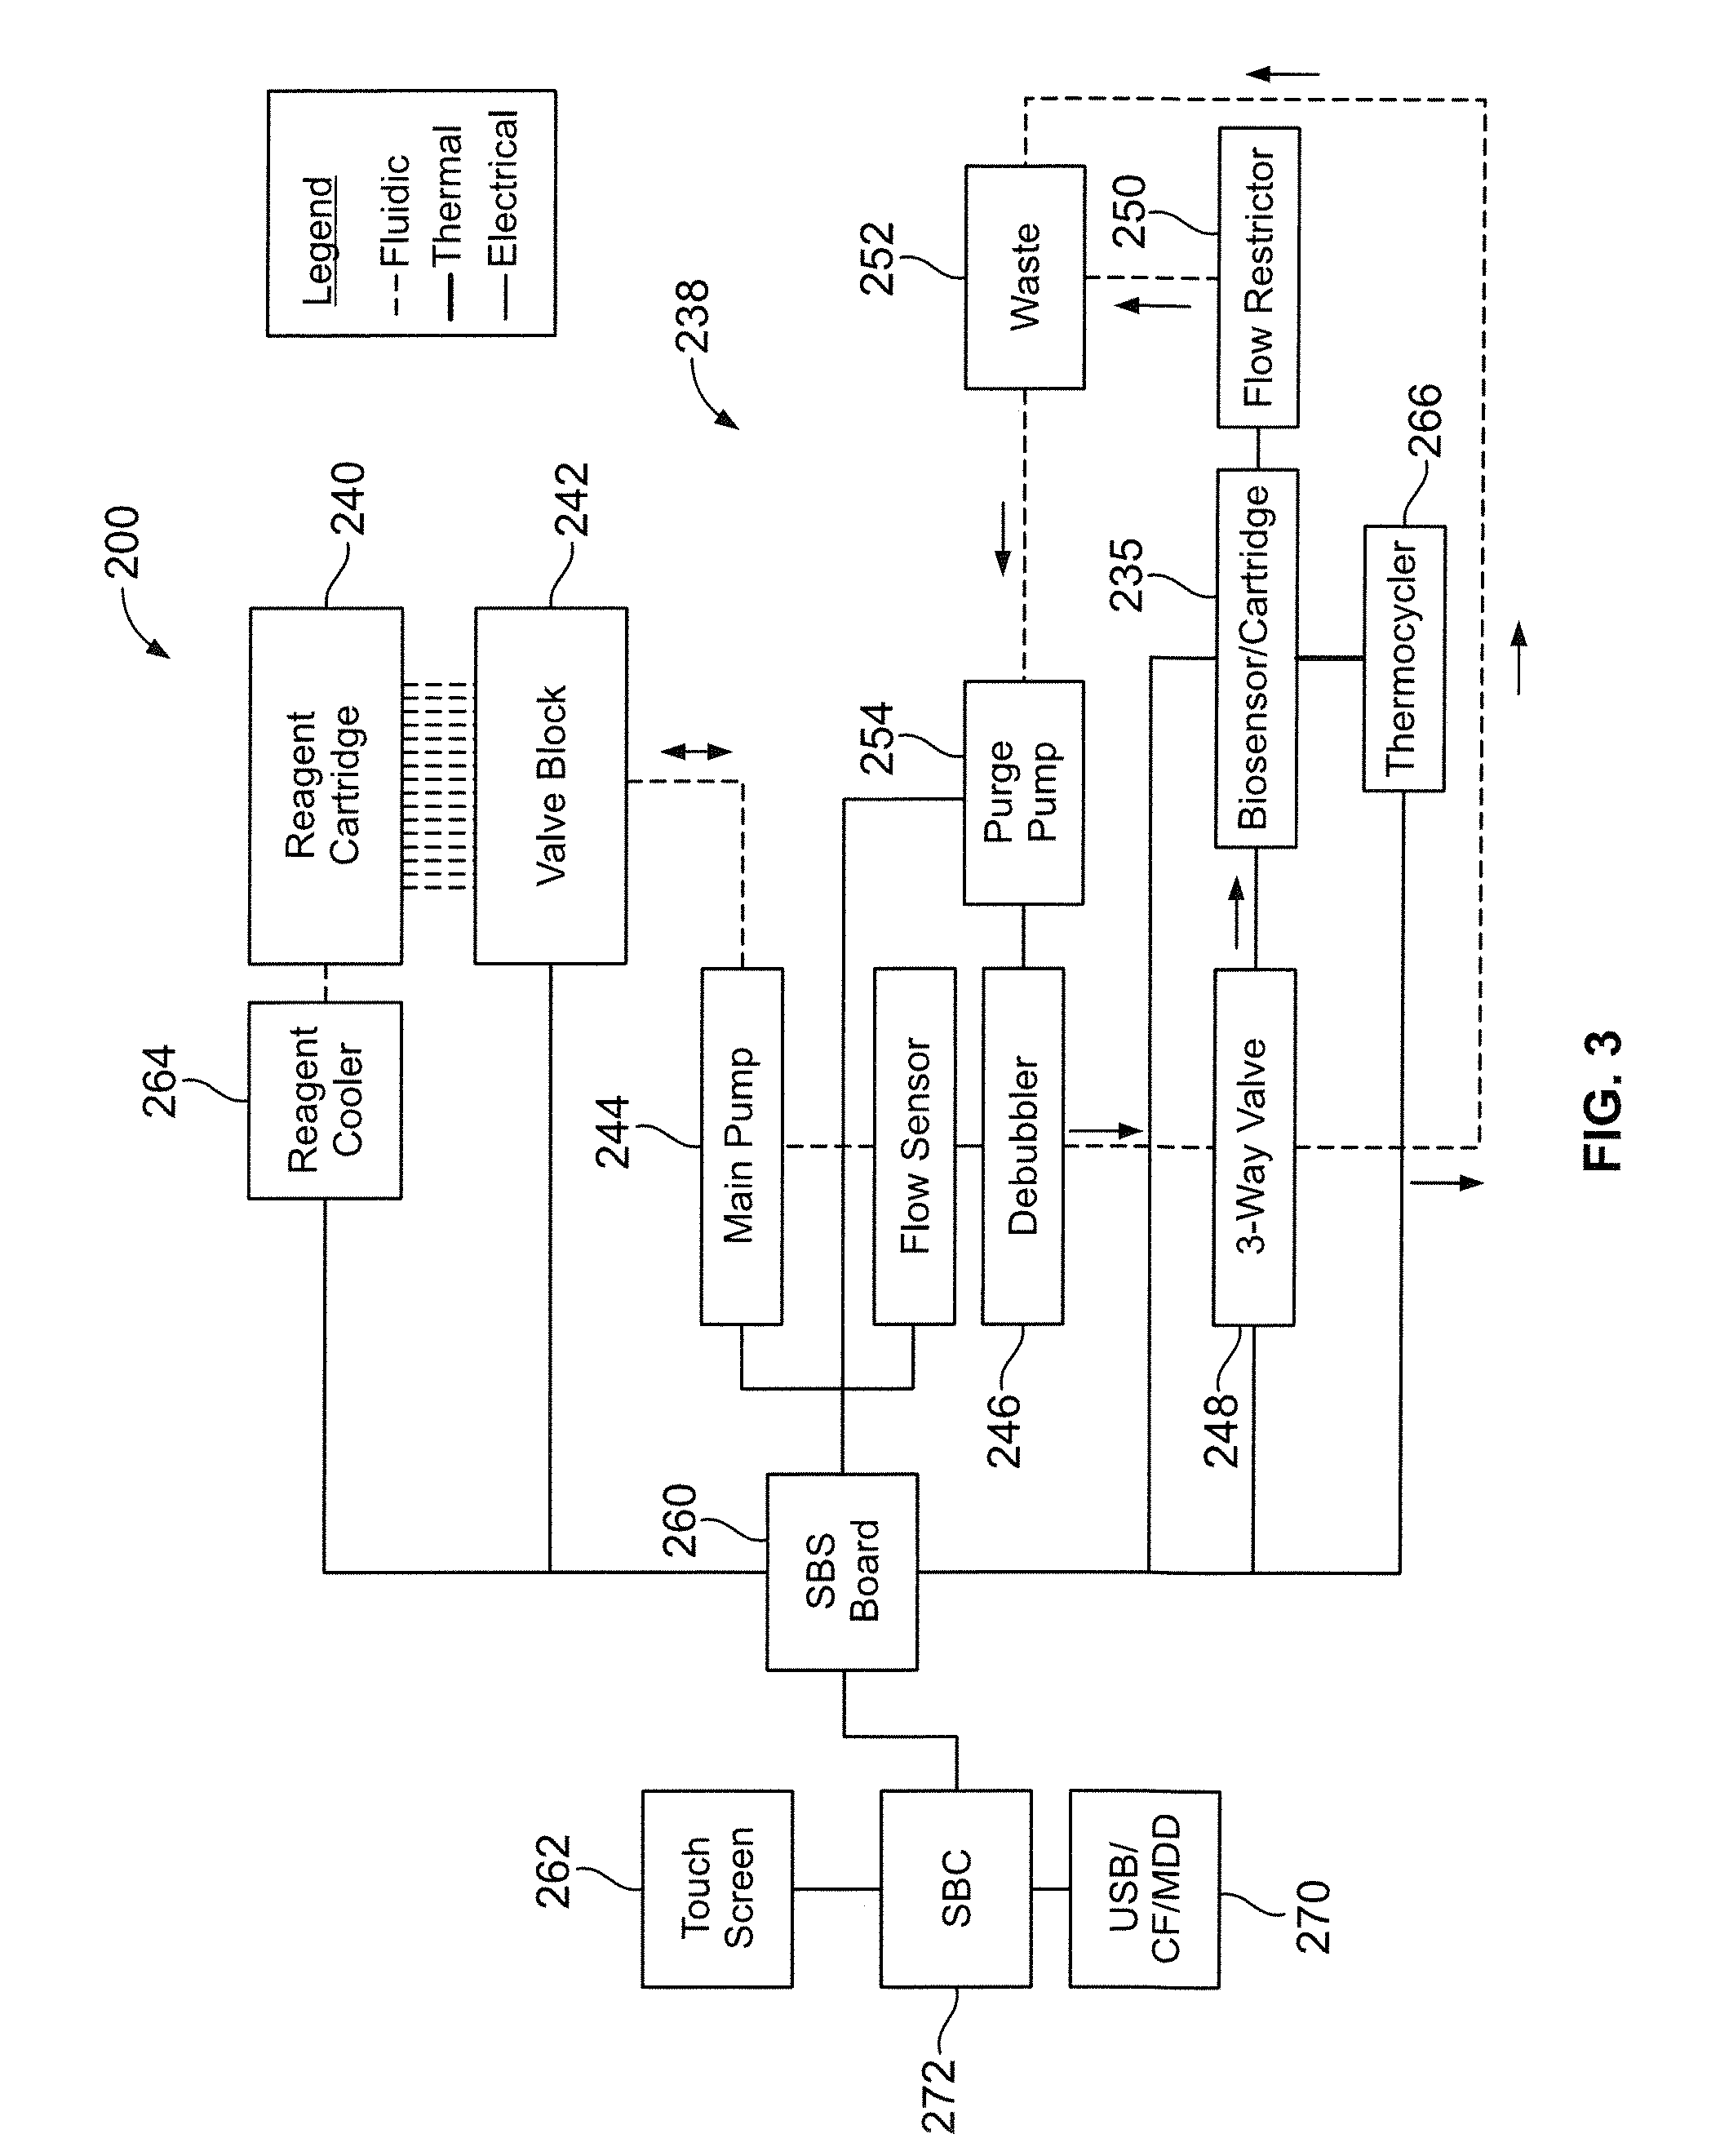 Biosensors for biological or chemical analysis and systems and methods for same